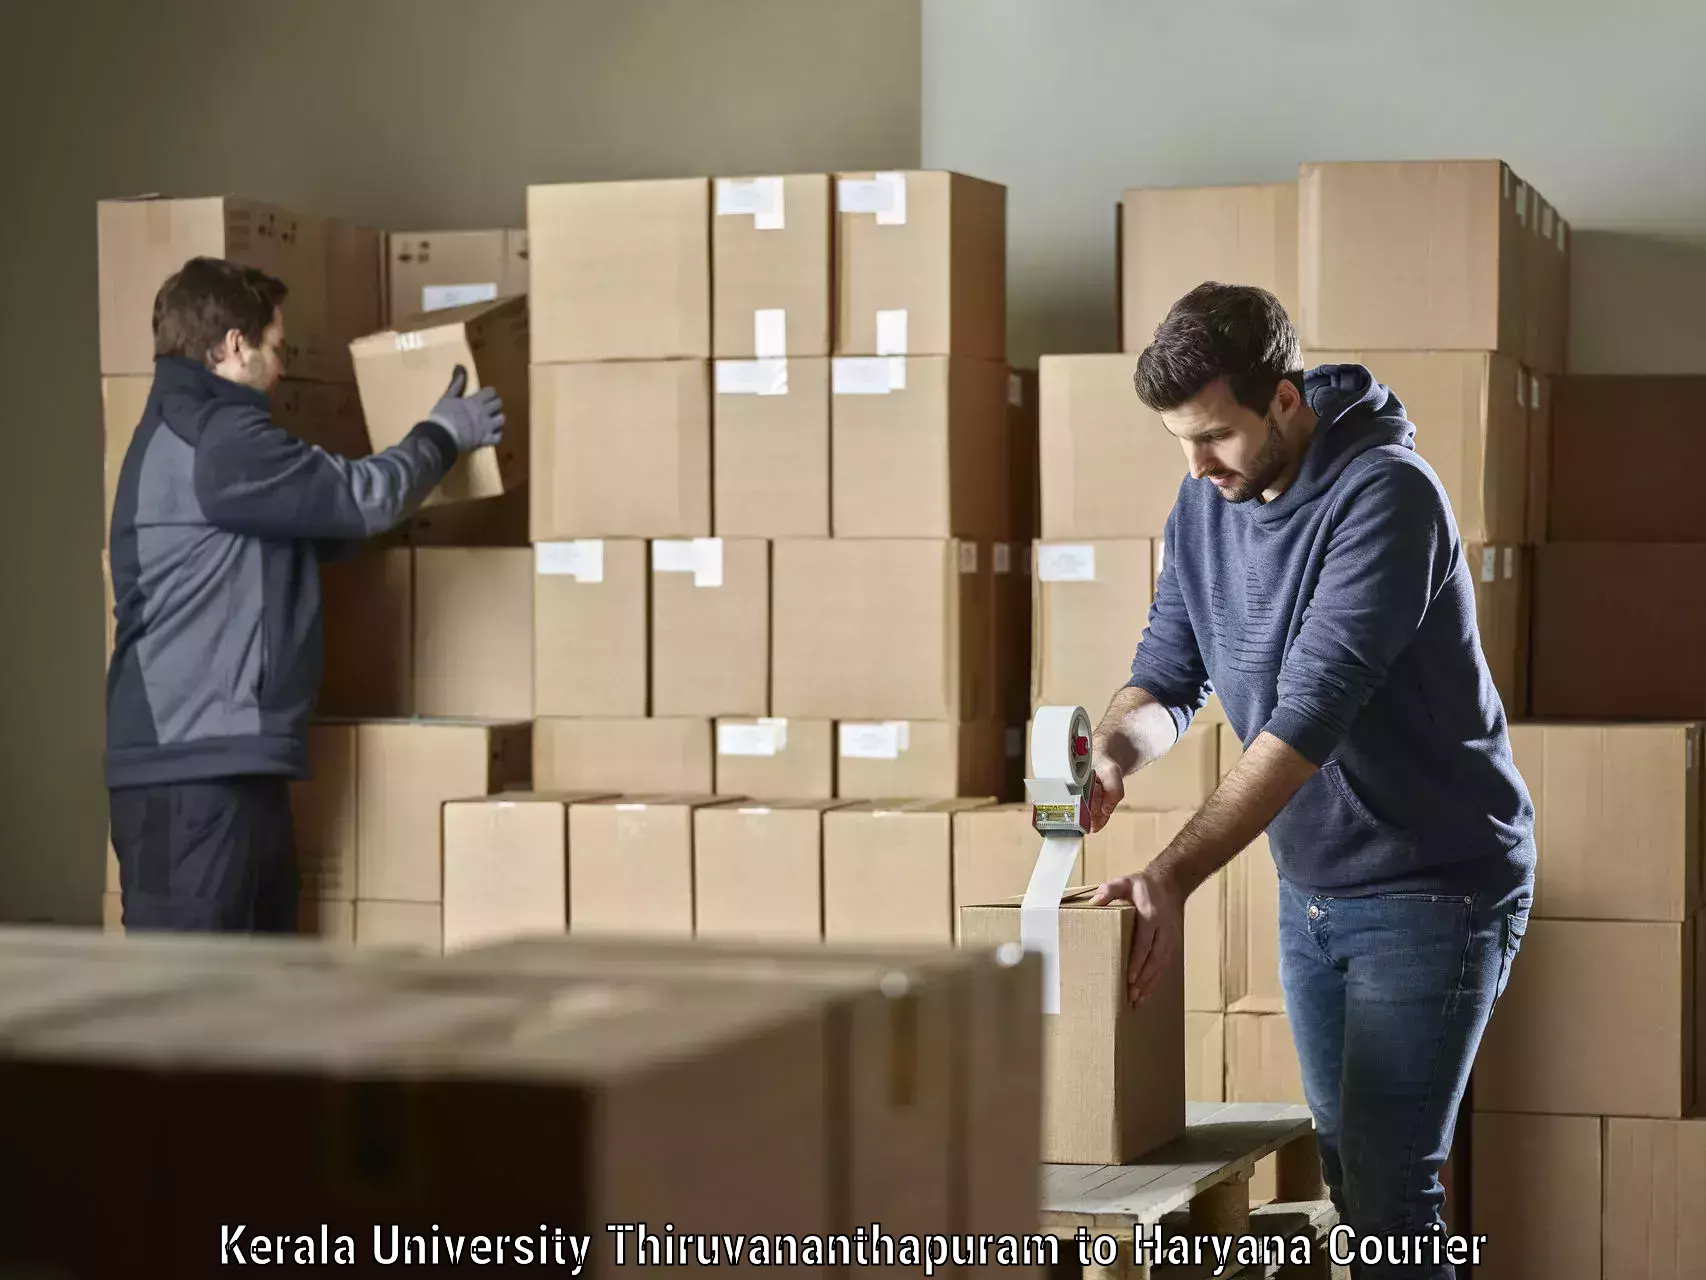 End-to-end delivery in Kerala University Thiruvananthapuram to Gohana